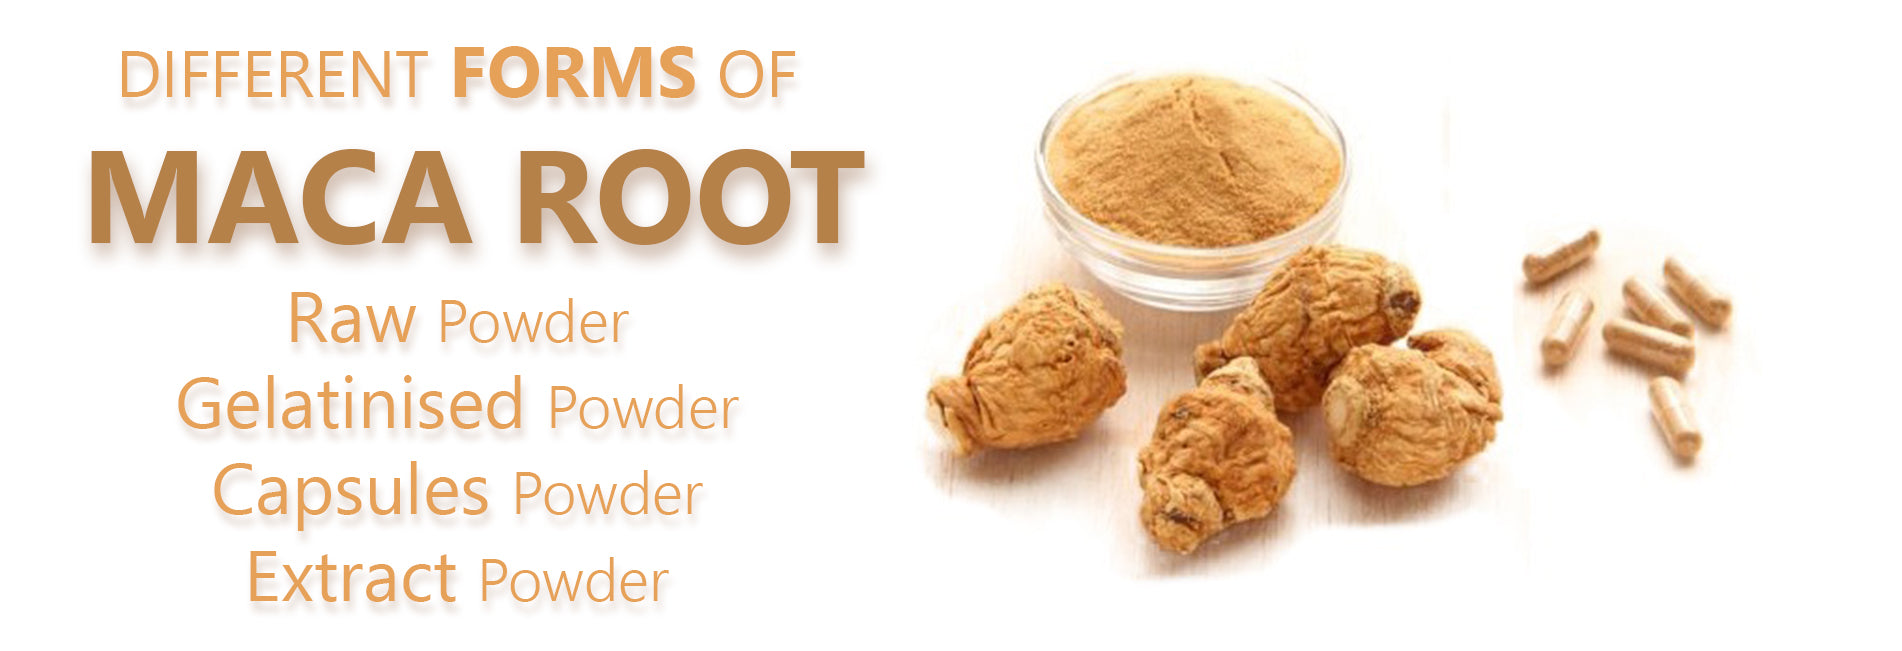 maca root powder capsule difference gelatinised extract what is best for consumption